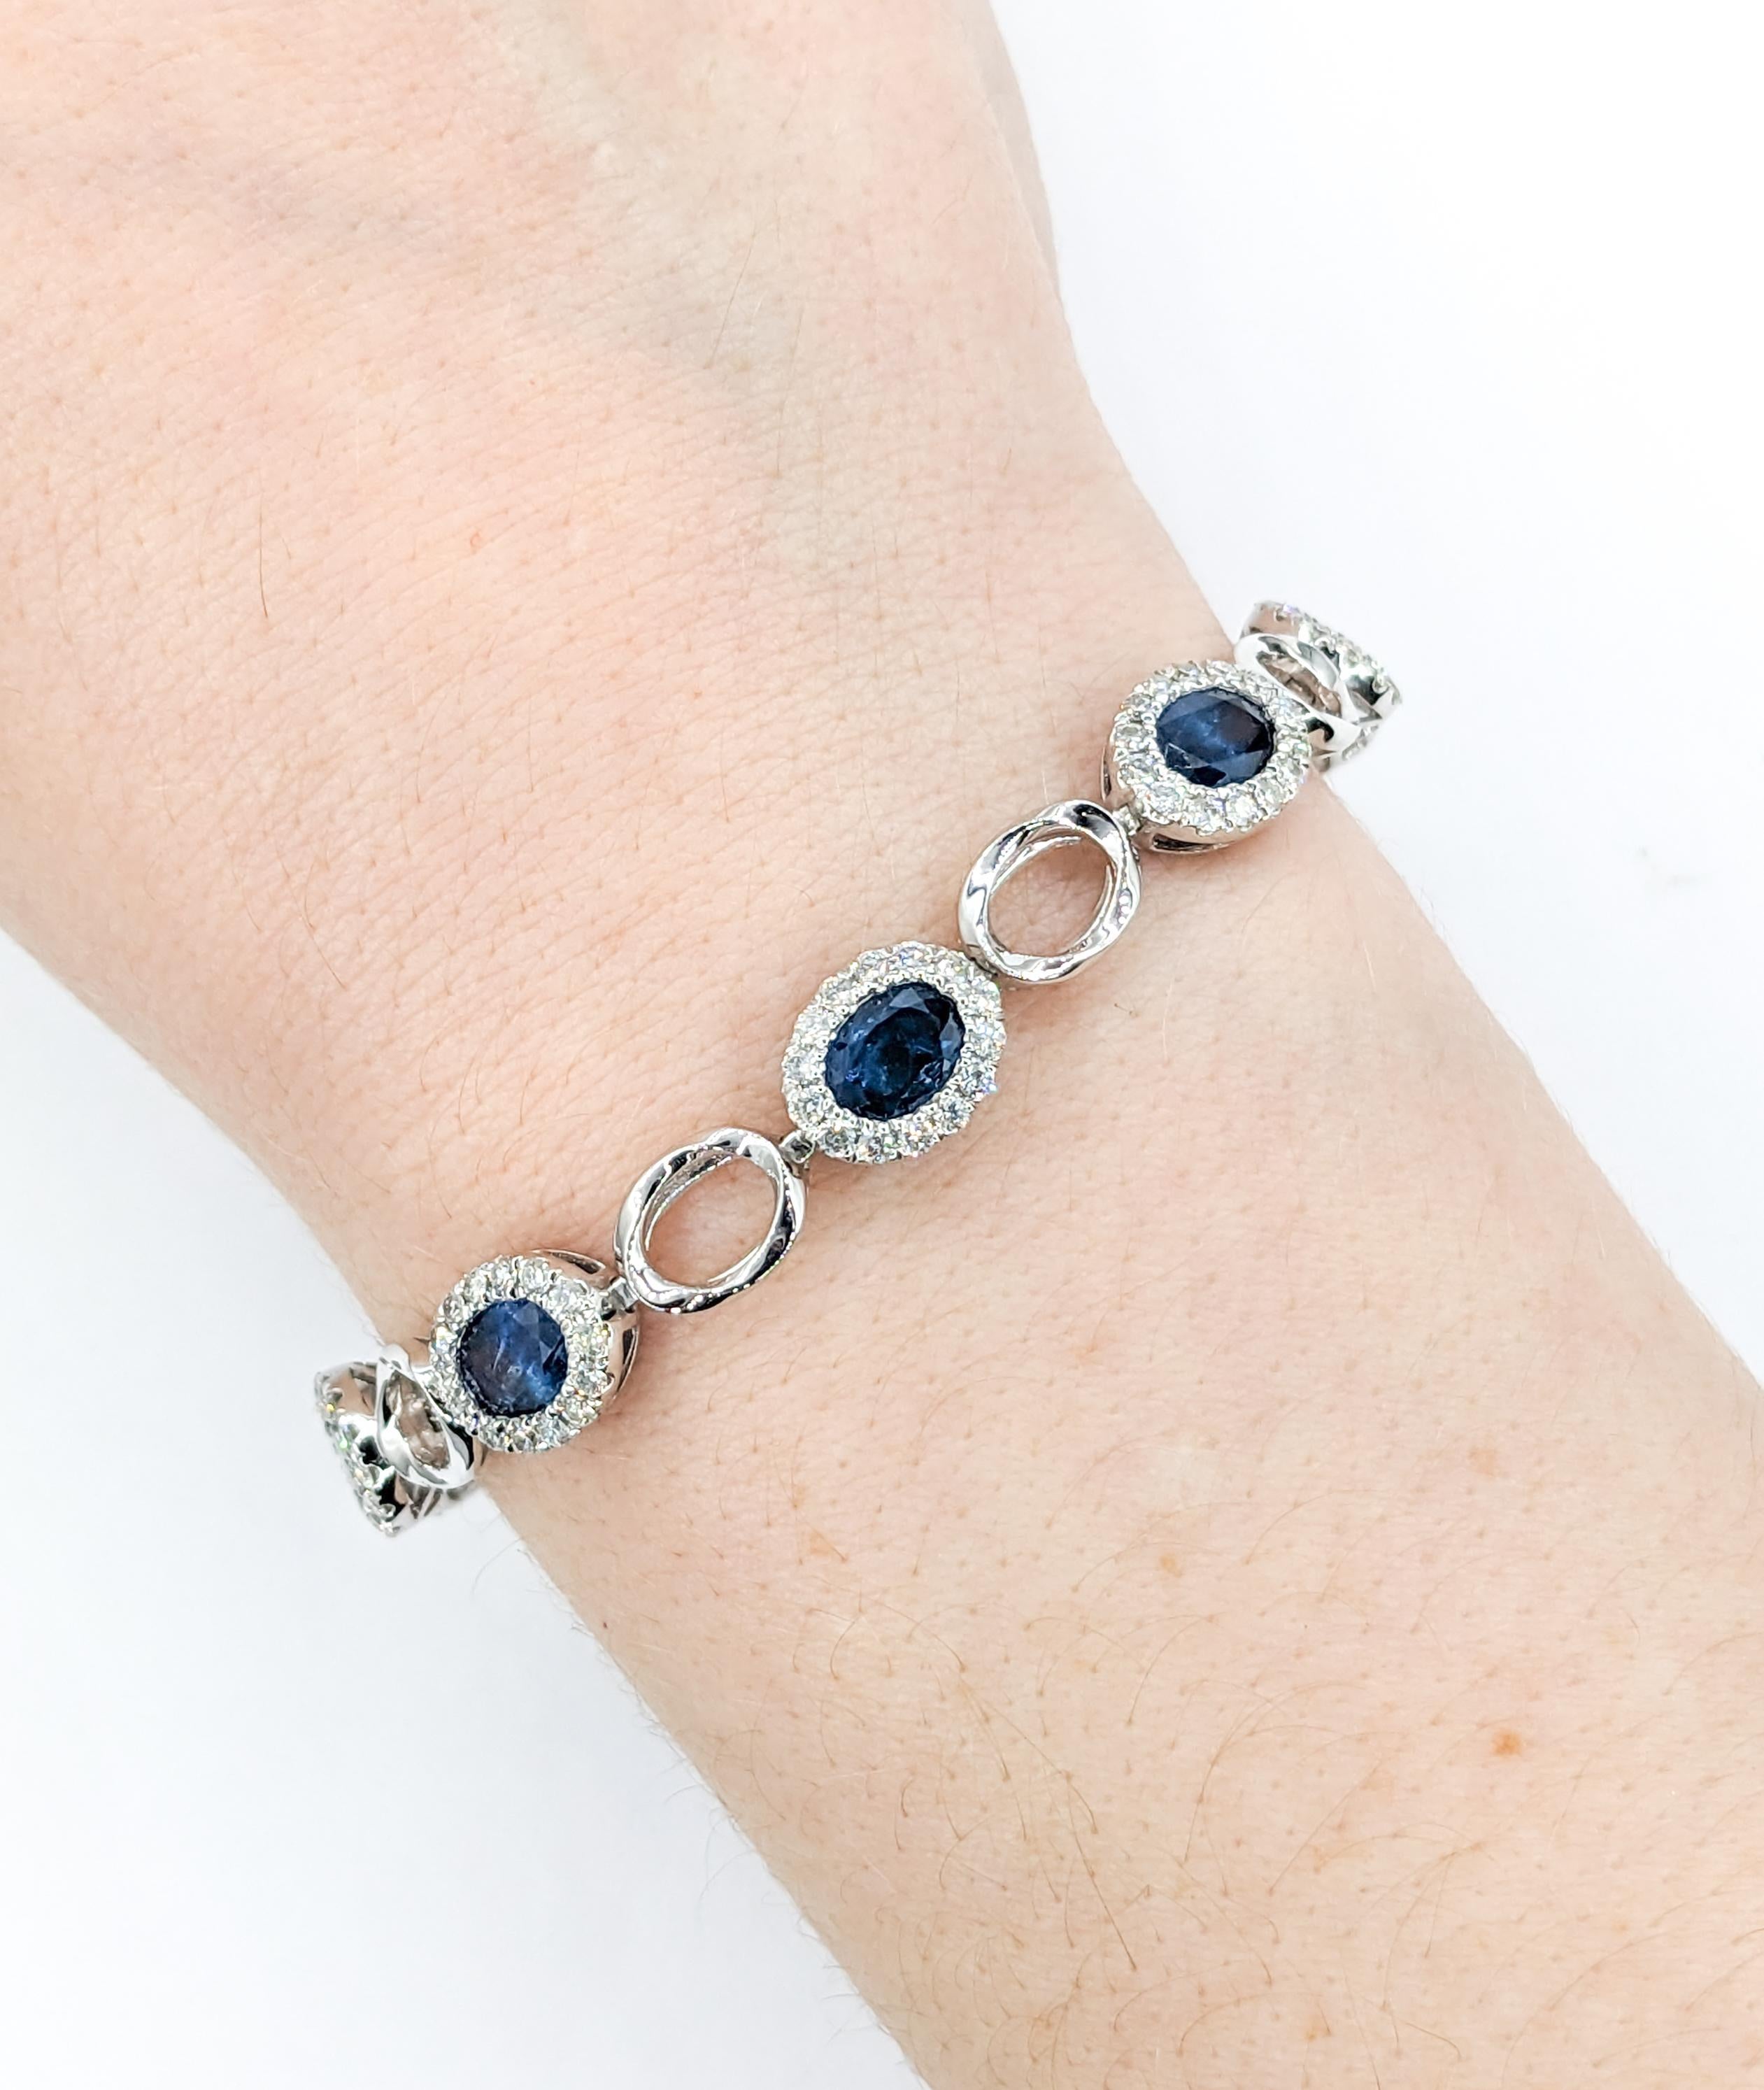 9.19ctw of Sapphires & 1.89ctw Diamond Bracelet In Platinum

Introducing an exquisite Sapphire Bracelet, masterfully crafted in bright Platinum. This luxurious bracelet is adorned with 9.19ctw of oval cut deep blue Sapphires. Adorning the sapphires